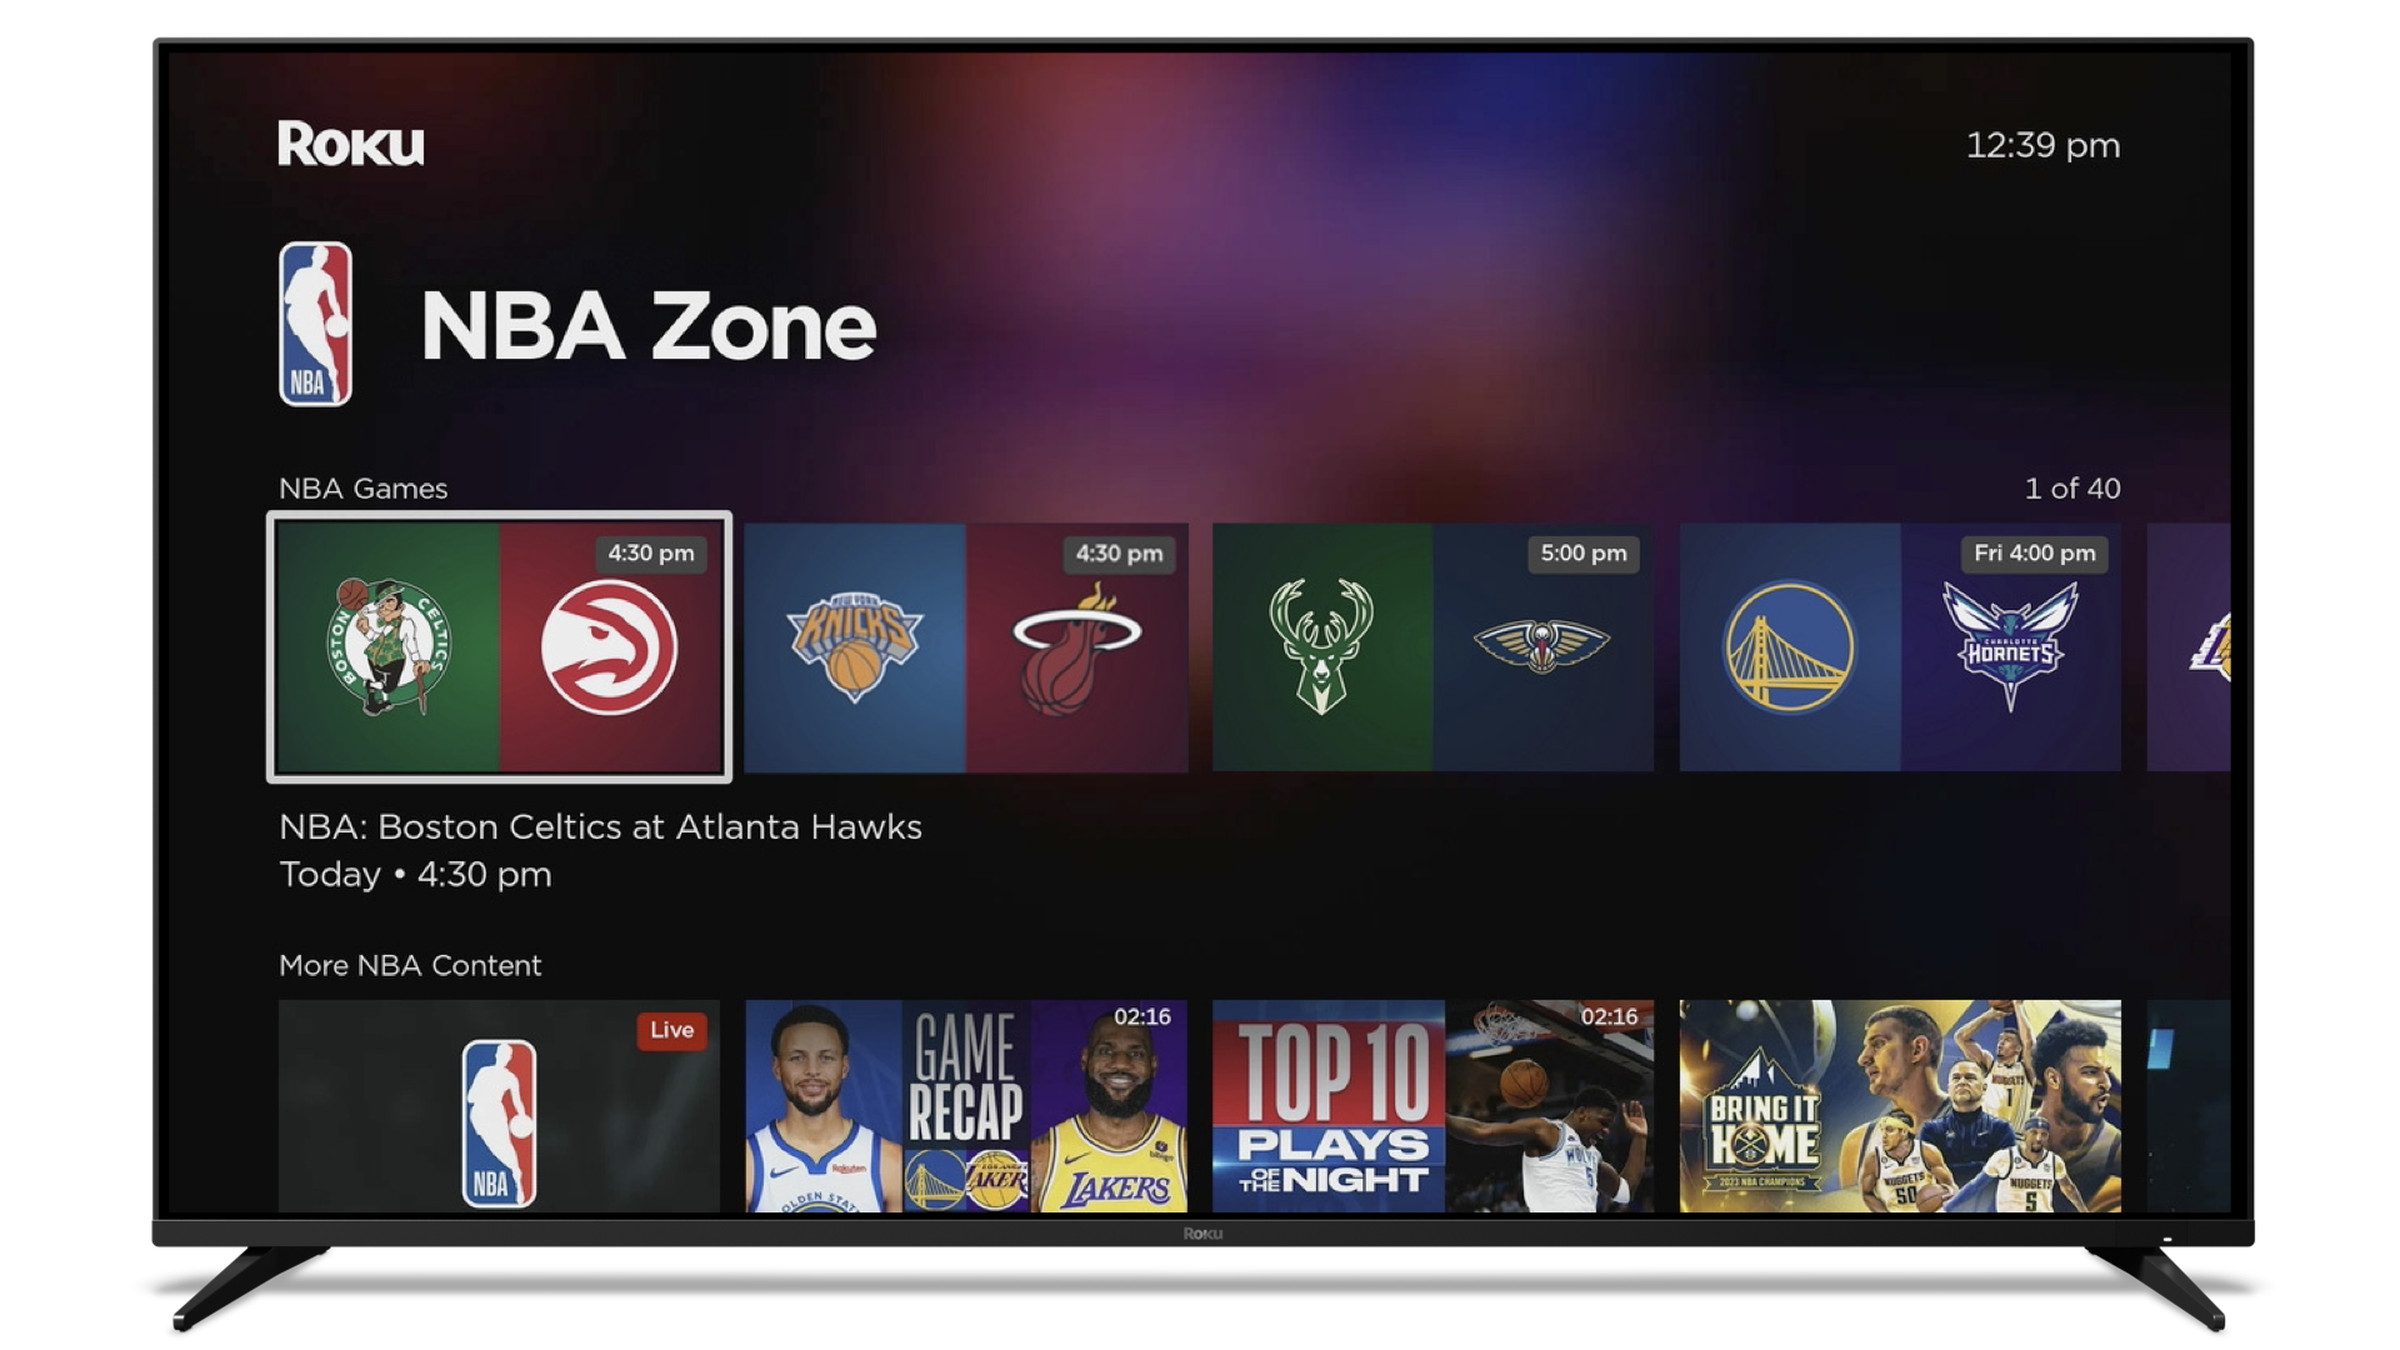 TV showing the “NBA Zone” free ad-supported channel on a Roku TV.